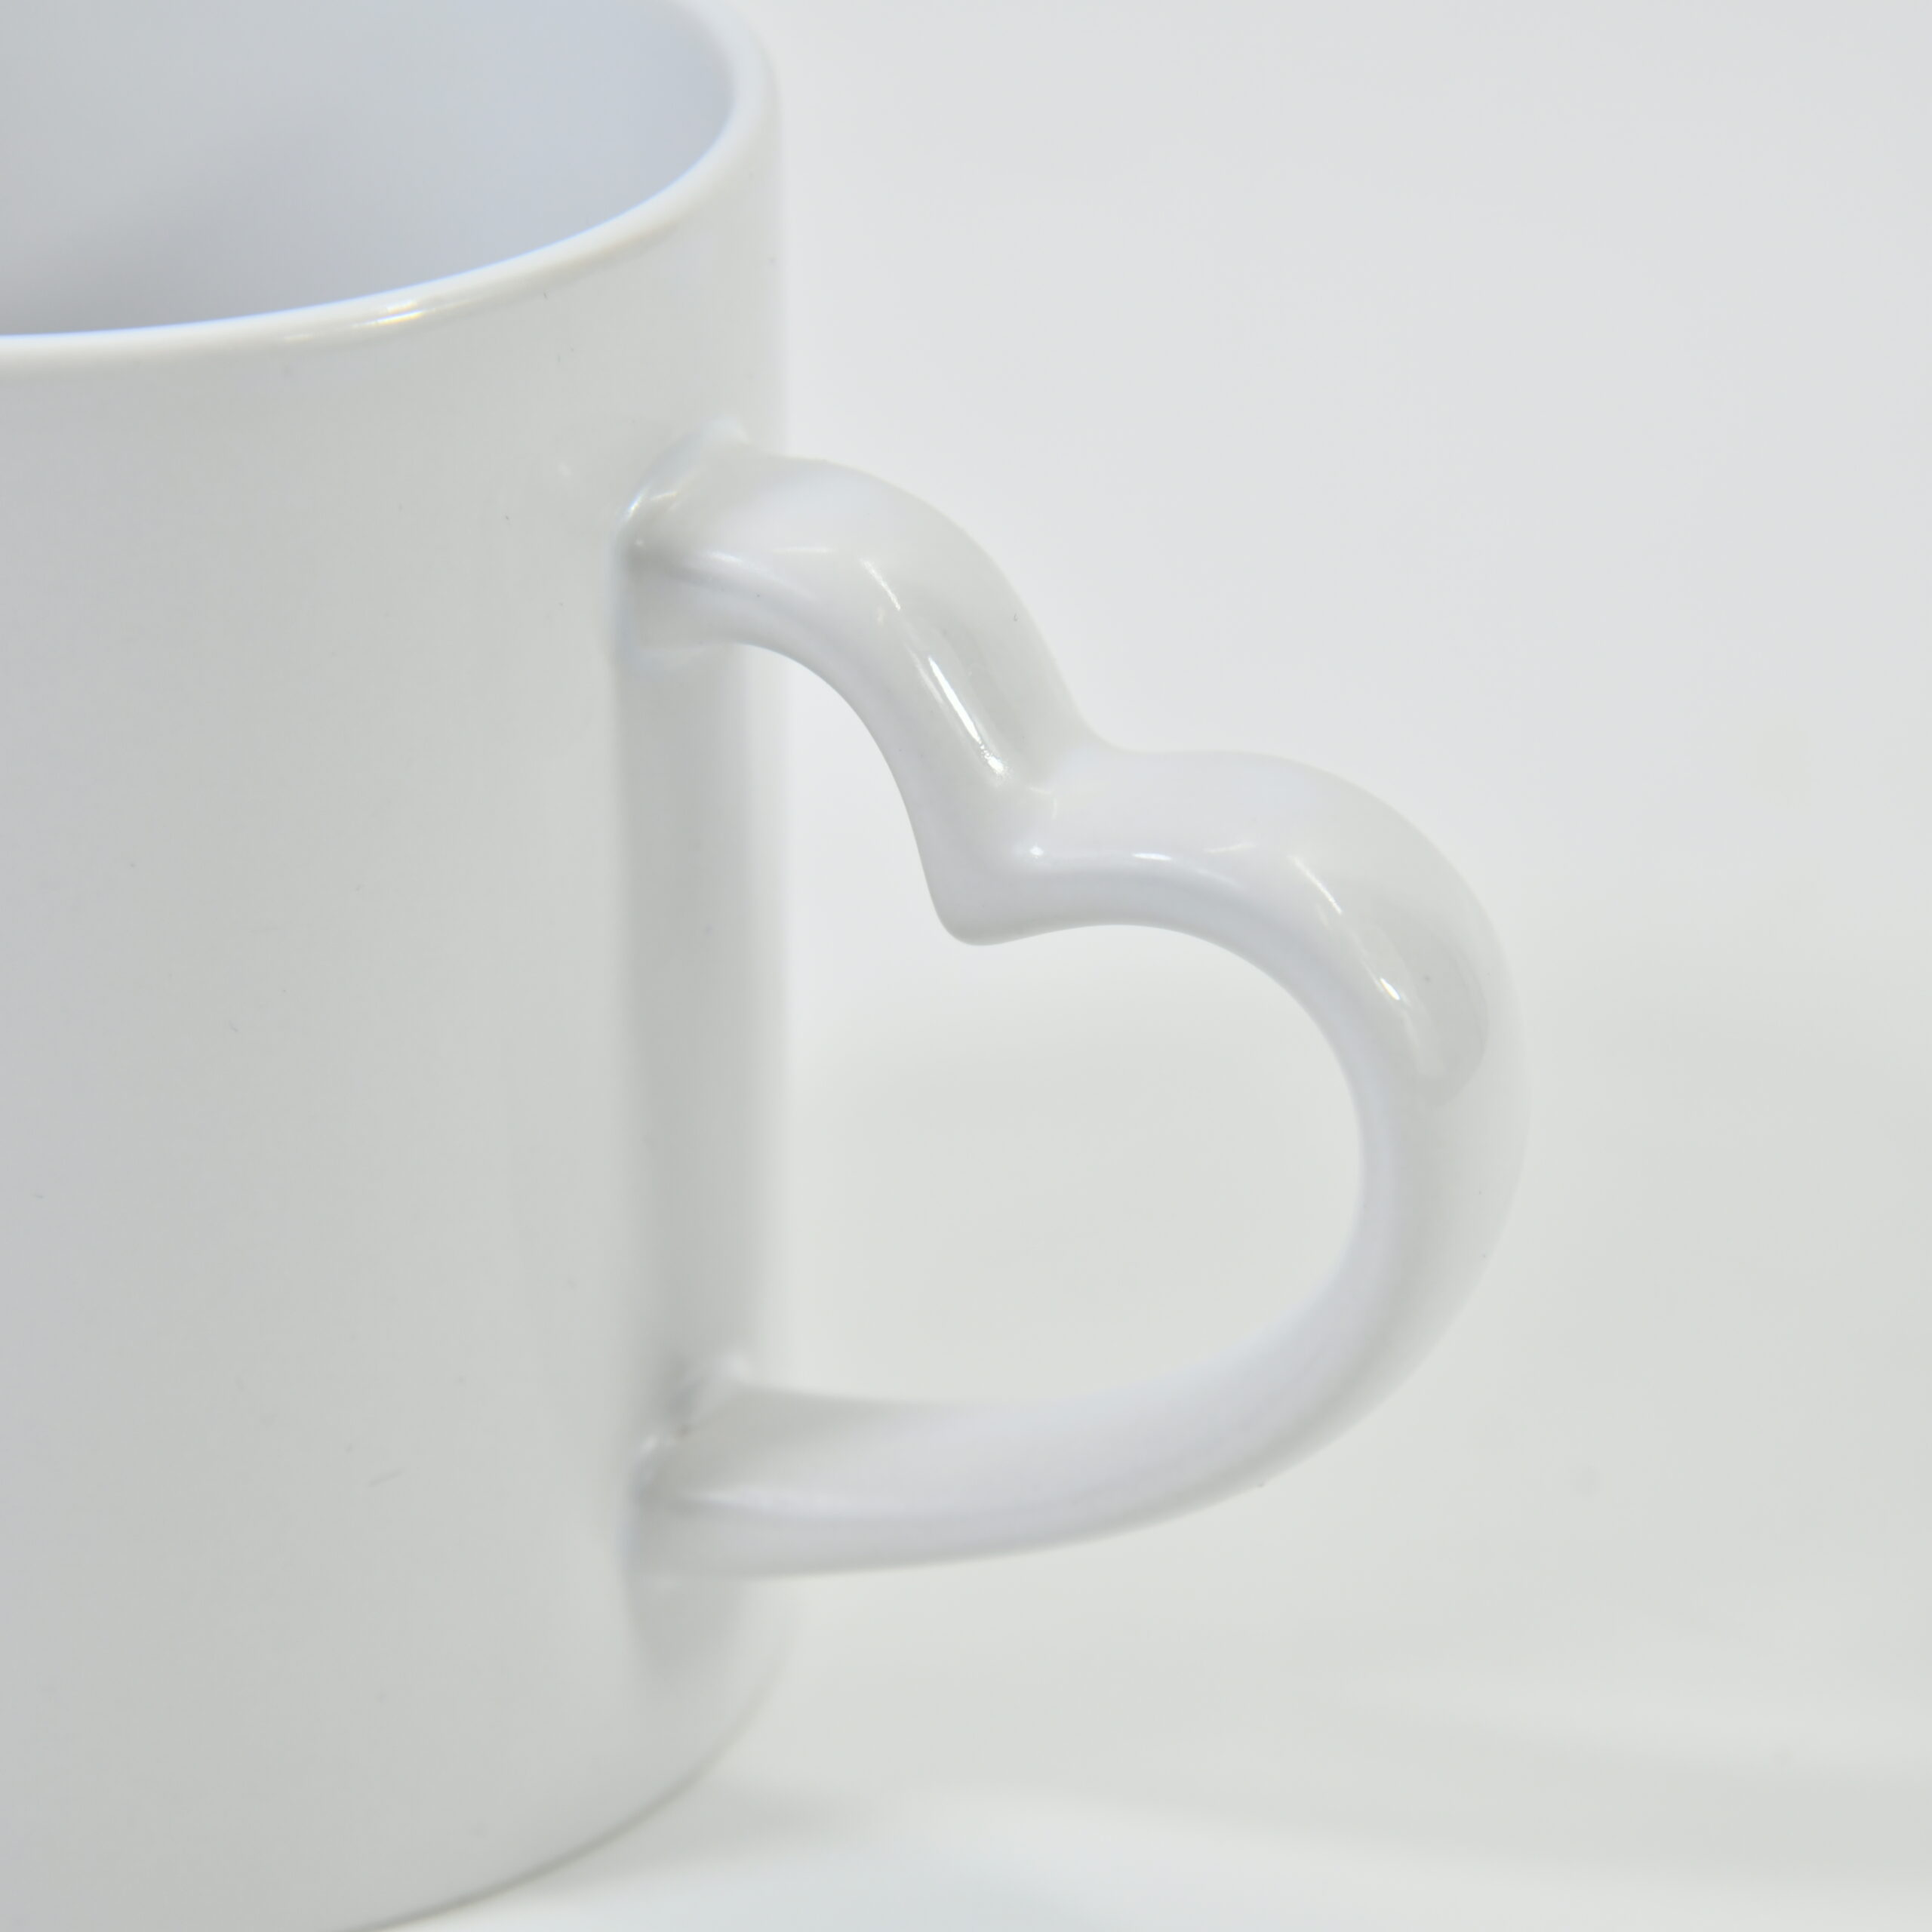 DIY Sublimation 11oz Coffee Mug With Heart Handle Ceramic 320ml White  Ceramics Cup Es Colorful Inner Coating Special Water Pottery FY4652 From  Wholesalefactory, $3.79